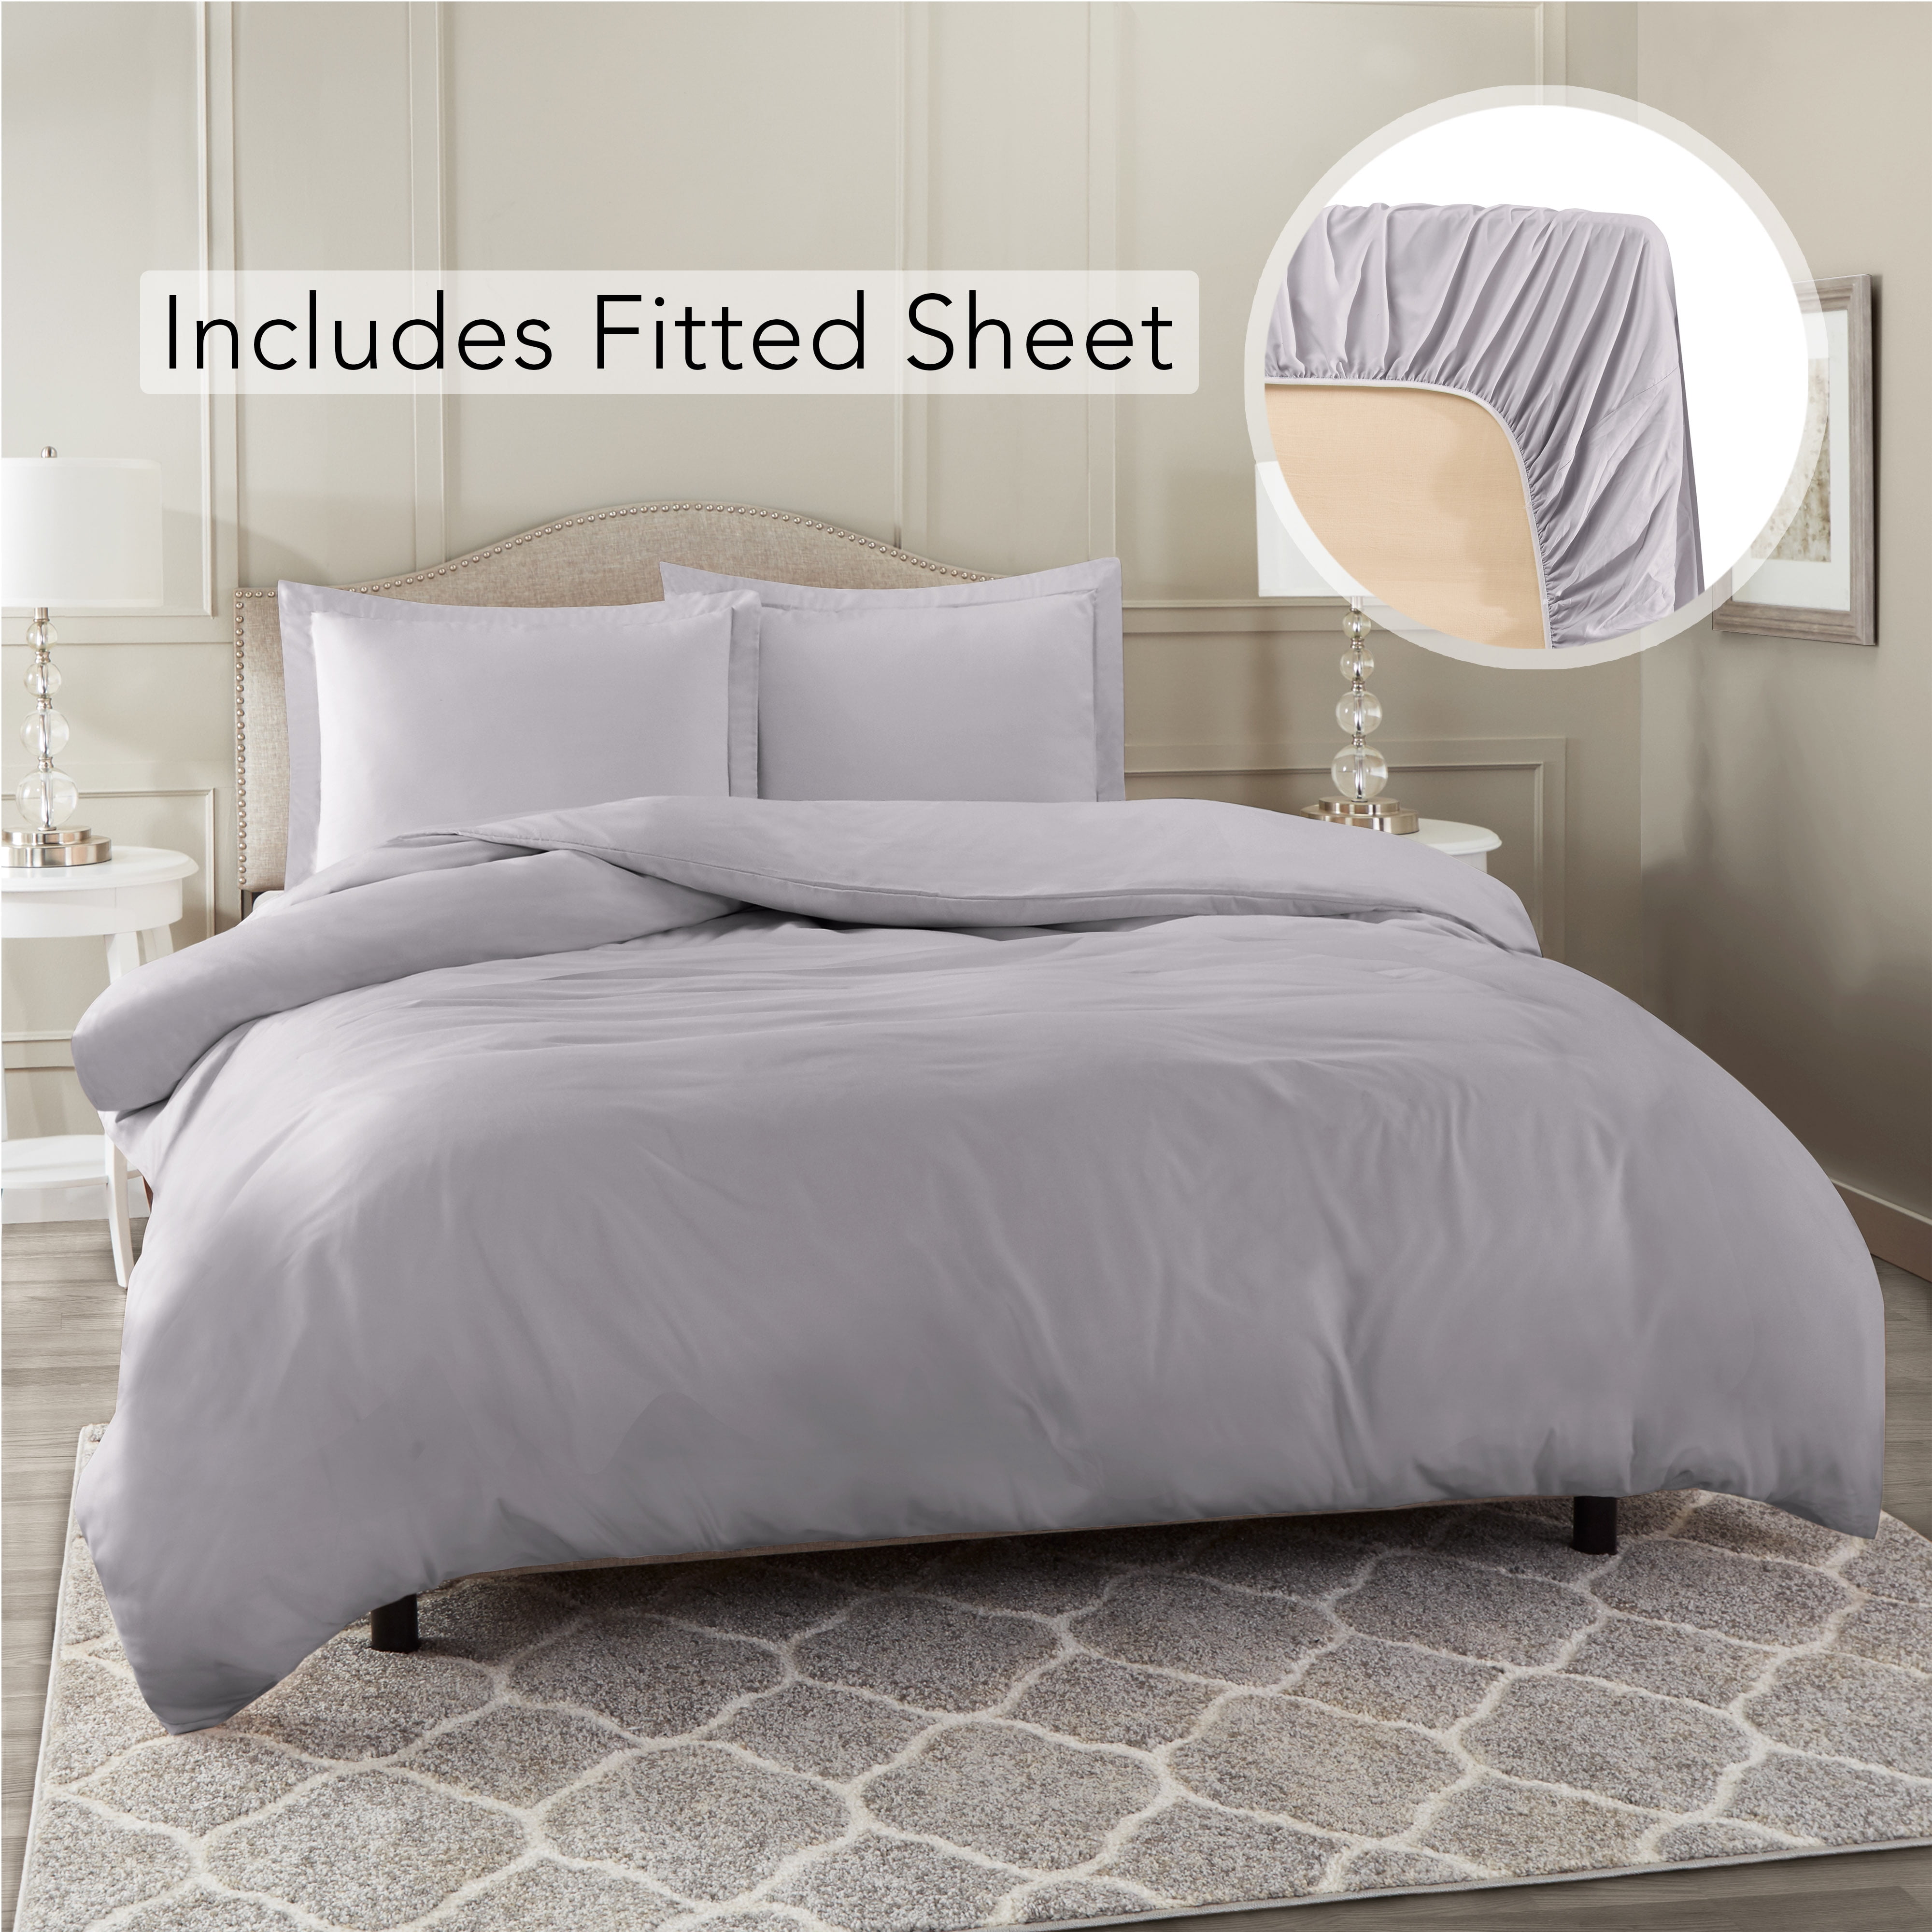 Twin Xl Size Duvet Cover With 1 Fitted, Gray Duvet Cover Twin Xl